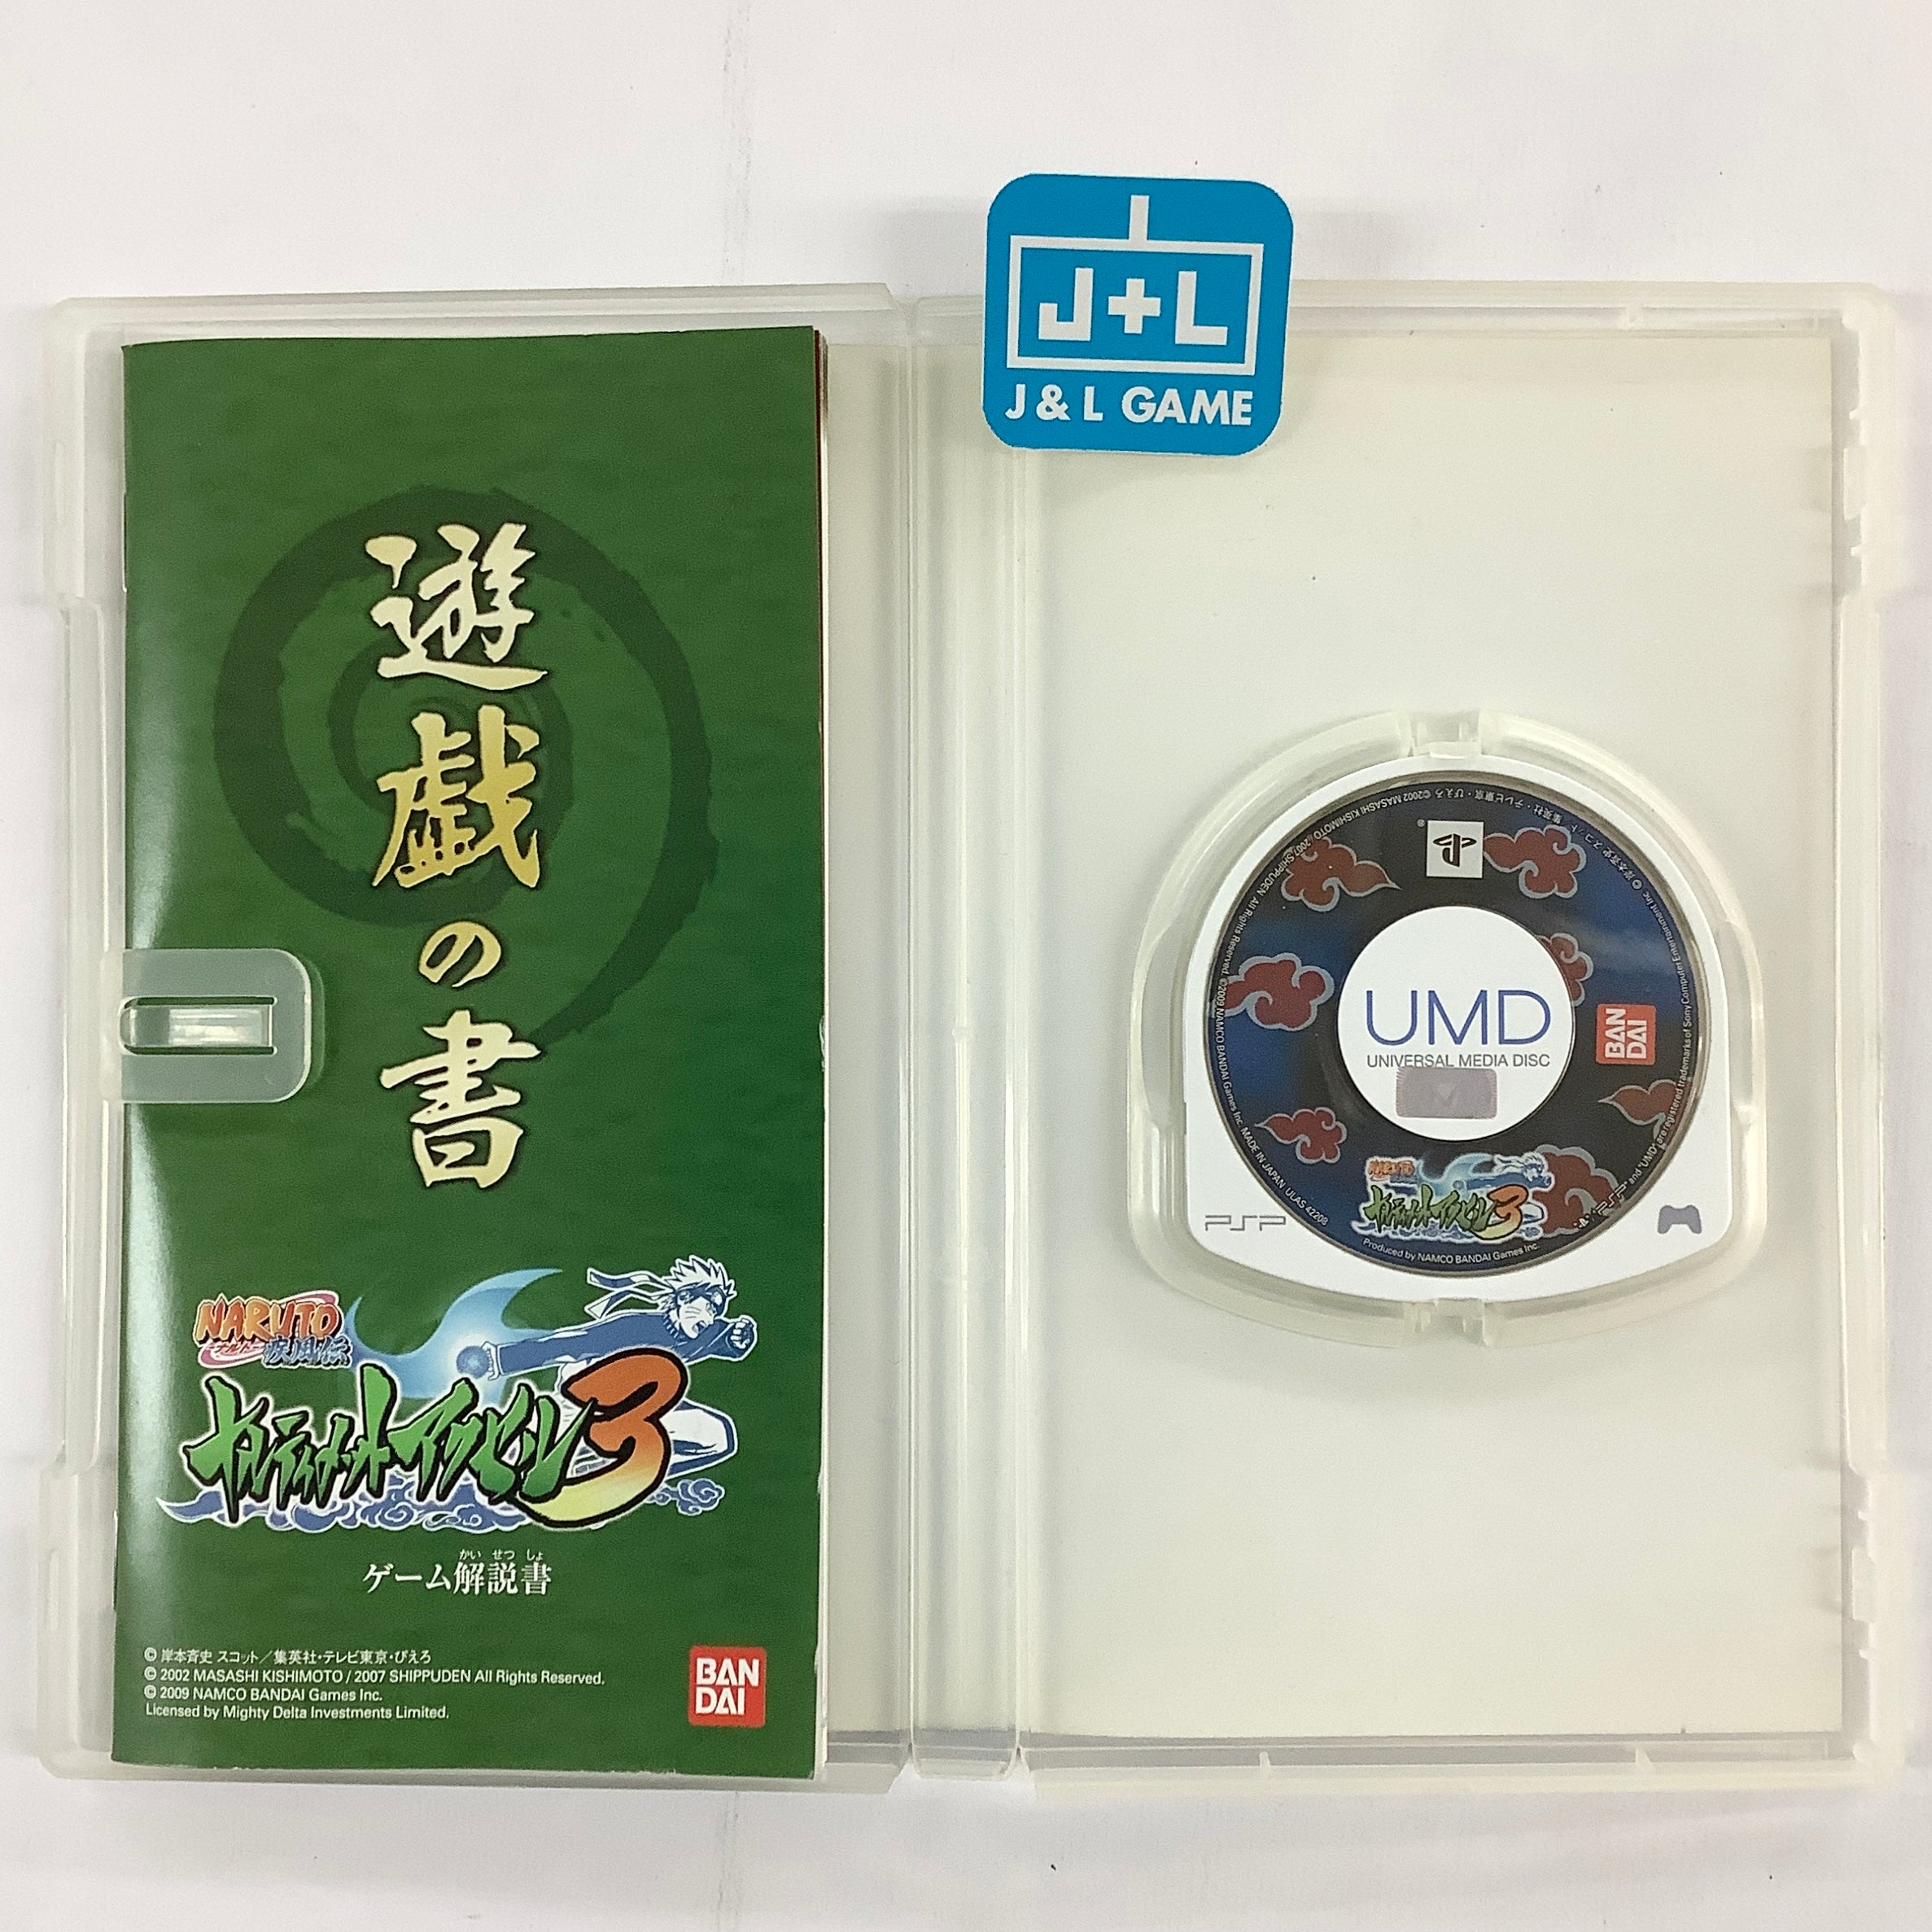 Naruto Shippuden: Narutimate Accel 3 (Japanese Sub)- Sony PSP [Pre-Owned] (Asia Import) Video Games Bandai Namco Games   